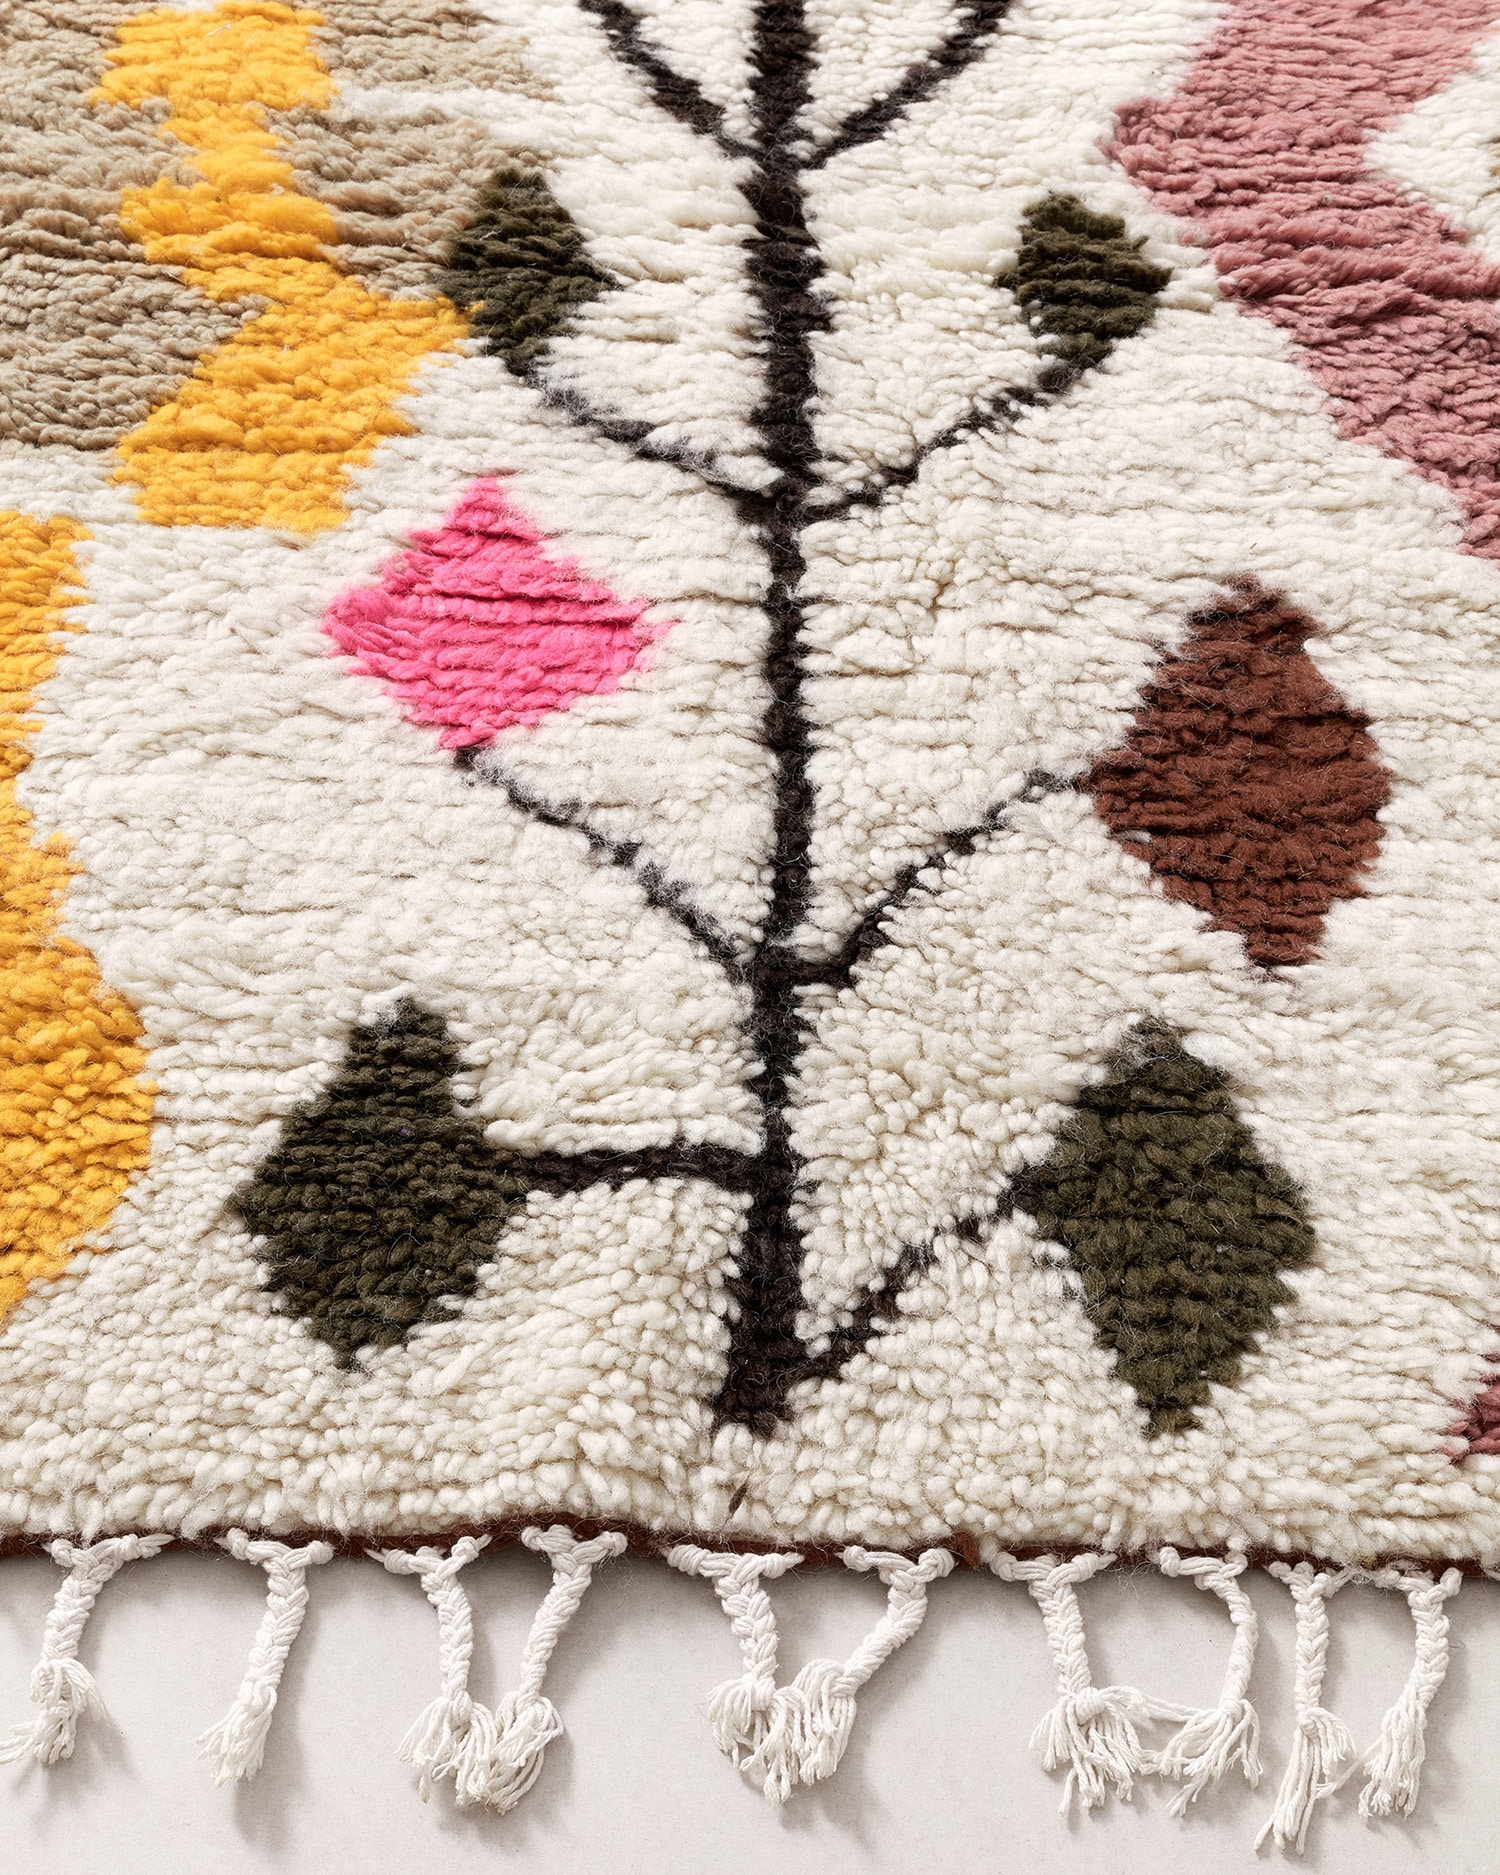 Pile knot rug with a tree of life